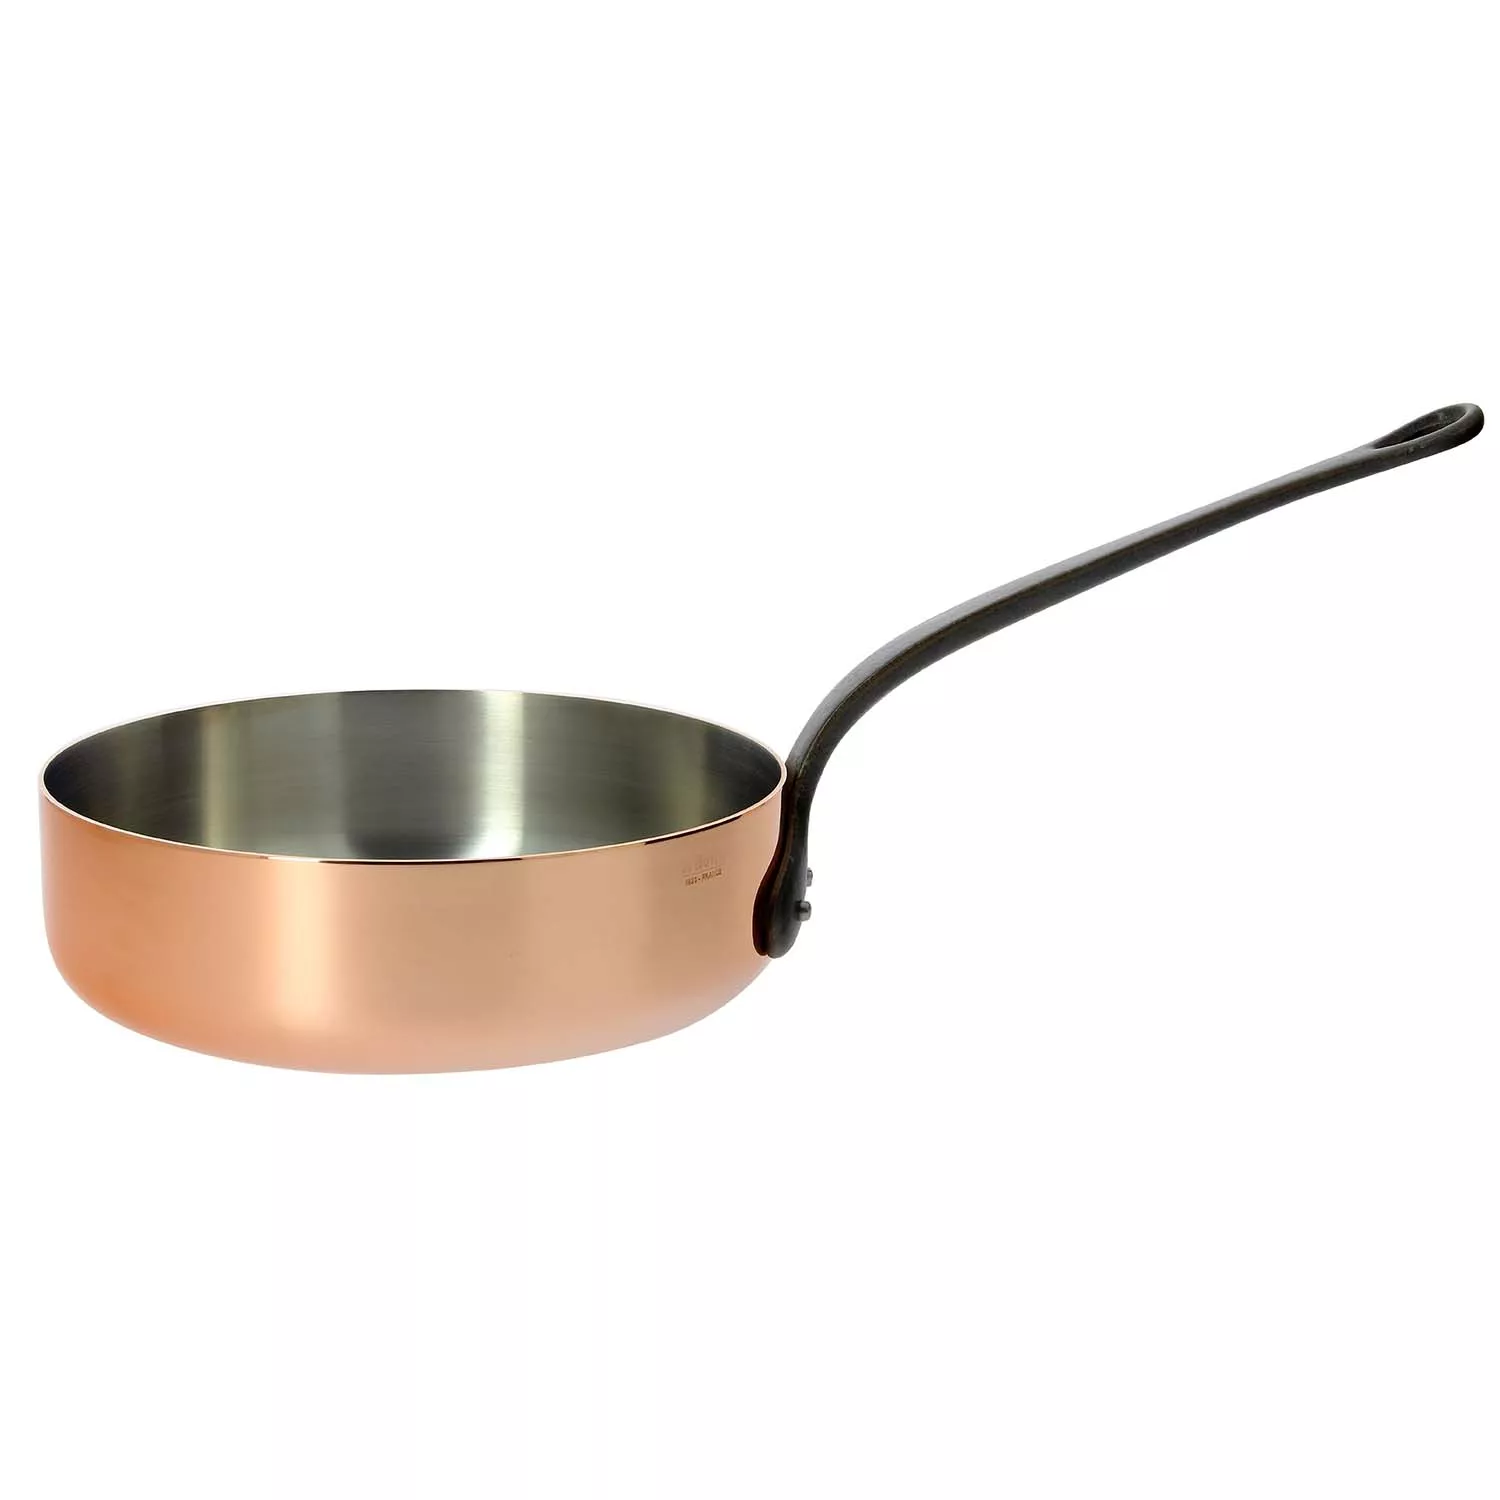 Copper Chef Deluxe 16 Electric Skillet with Stainless Steel Handles-  Buffet Server - For Steaming, Sauteing or Frying 